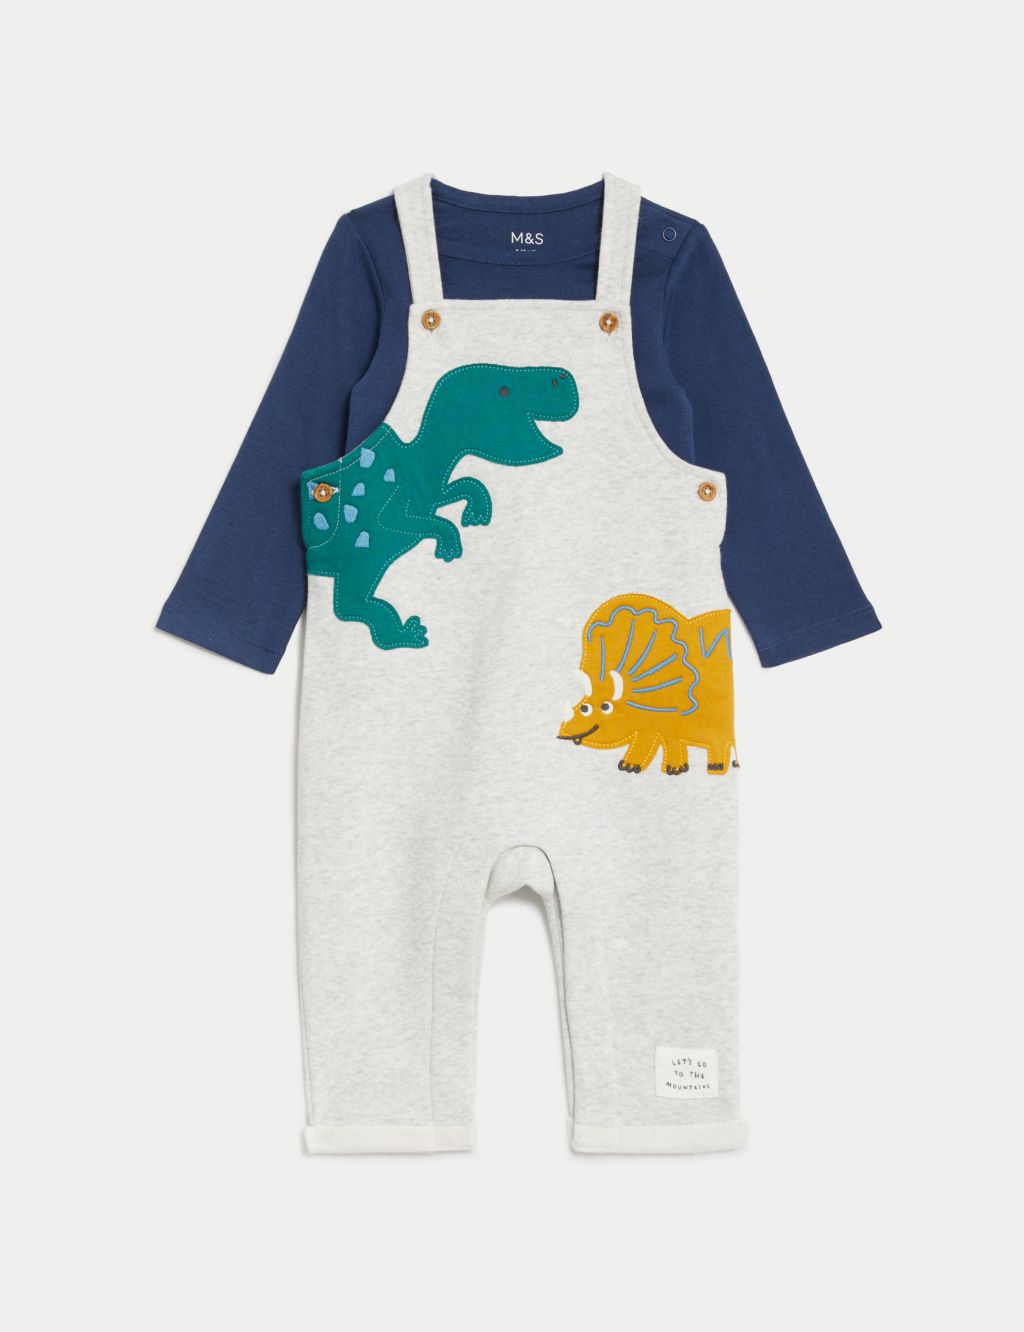 2pc Cotton Rich Dinosaur Outfit (0-3 Yrs)